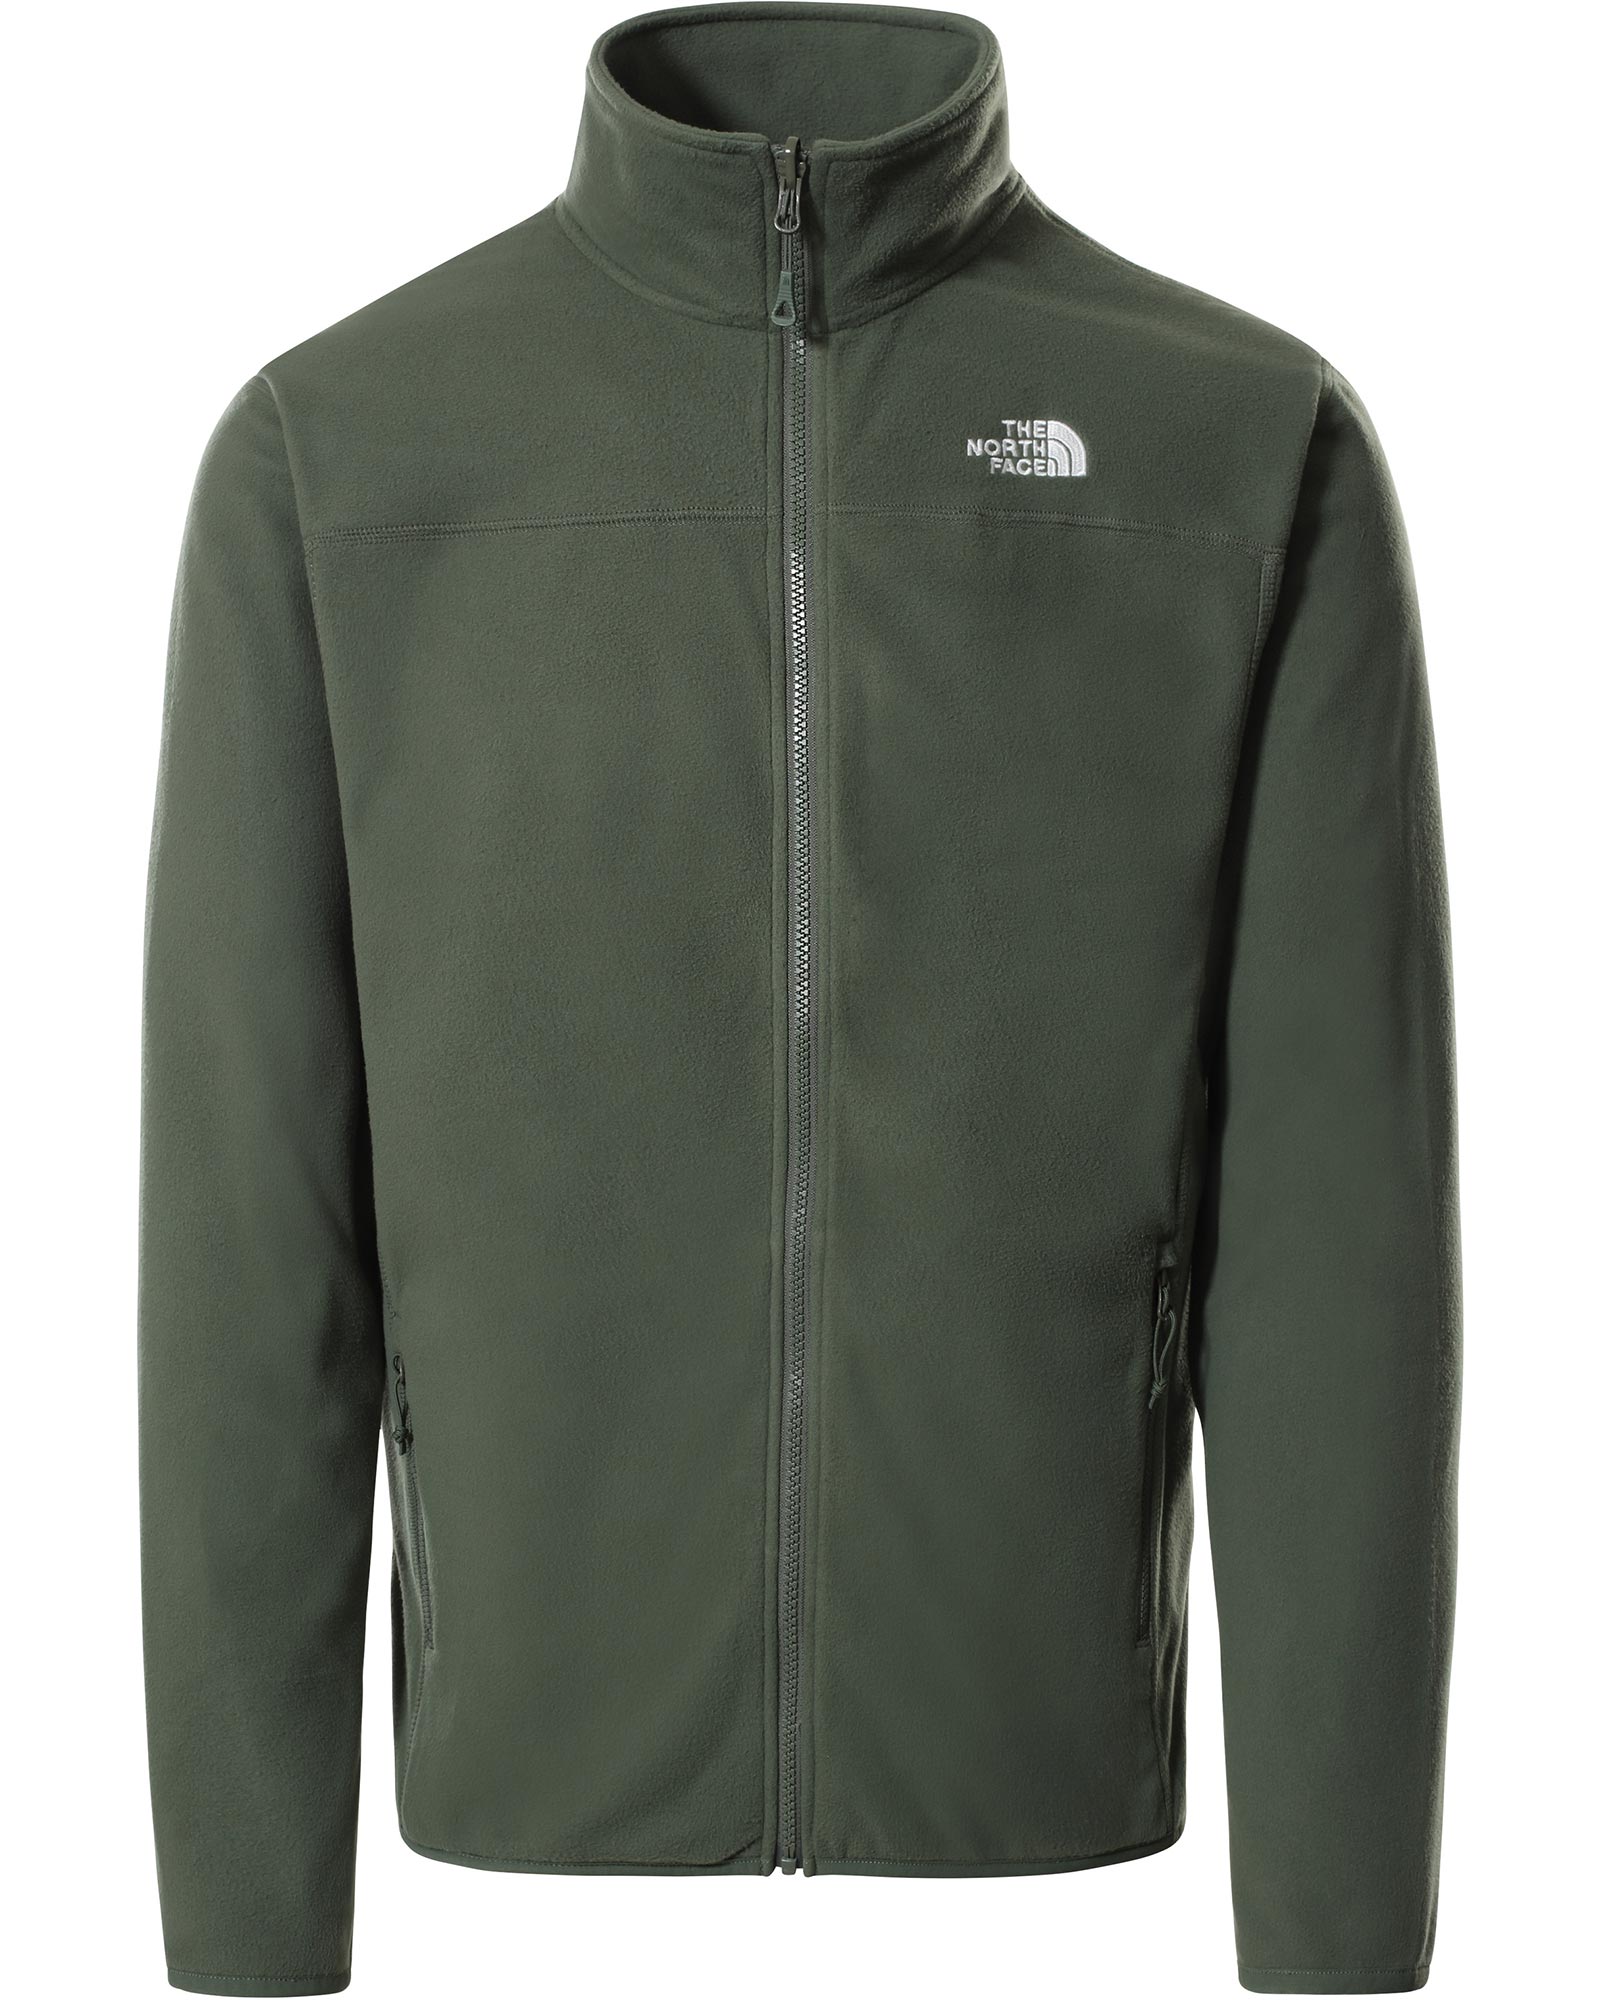 The North Face 100 Glacier Men’s Full Zip Jacket - Thyme S